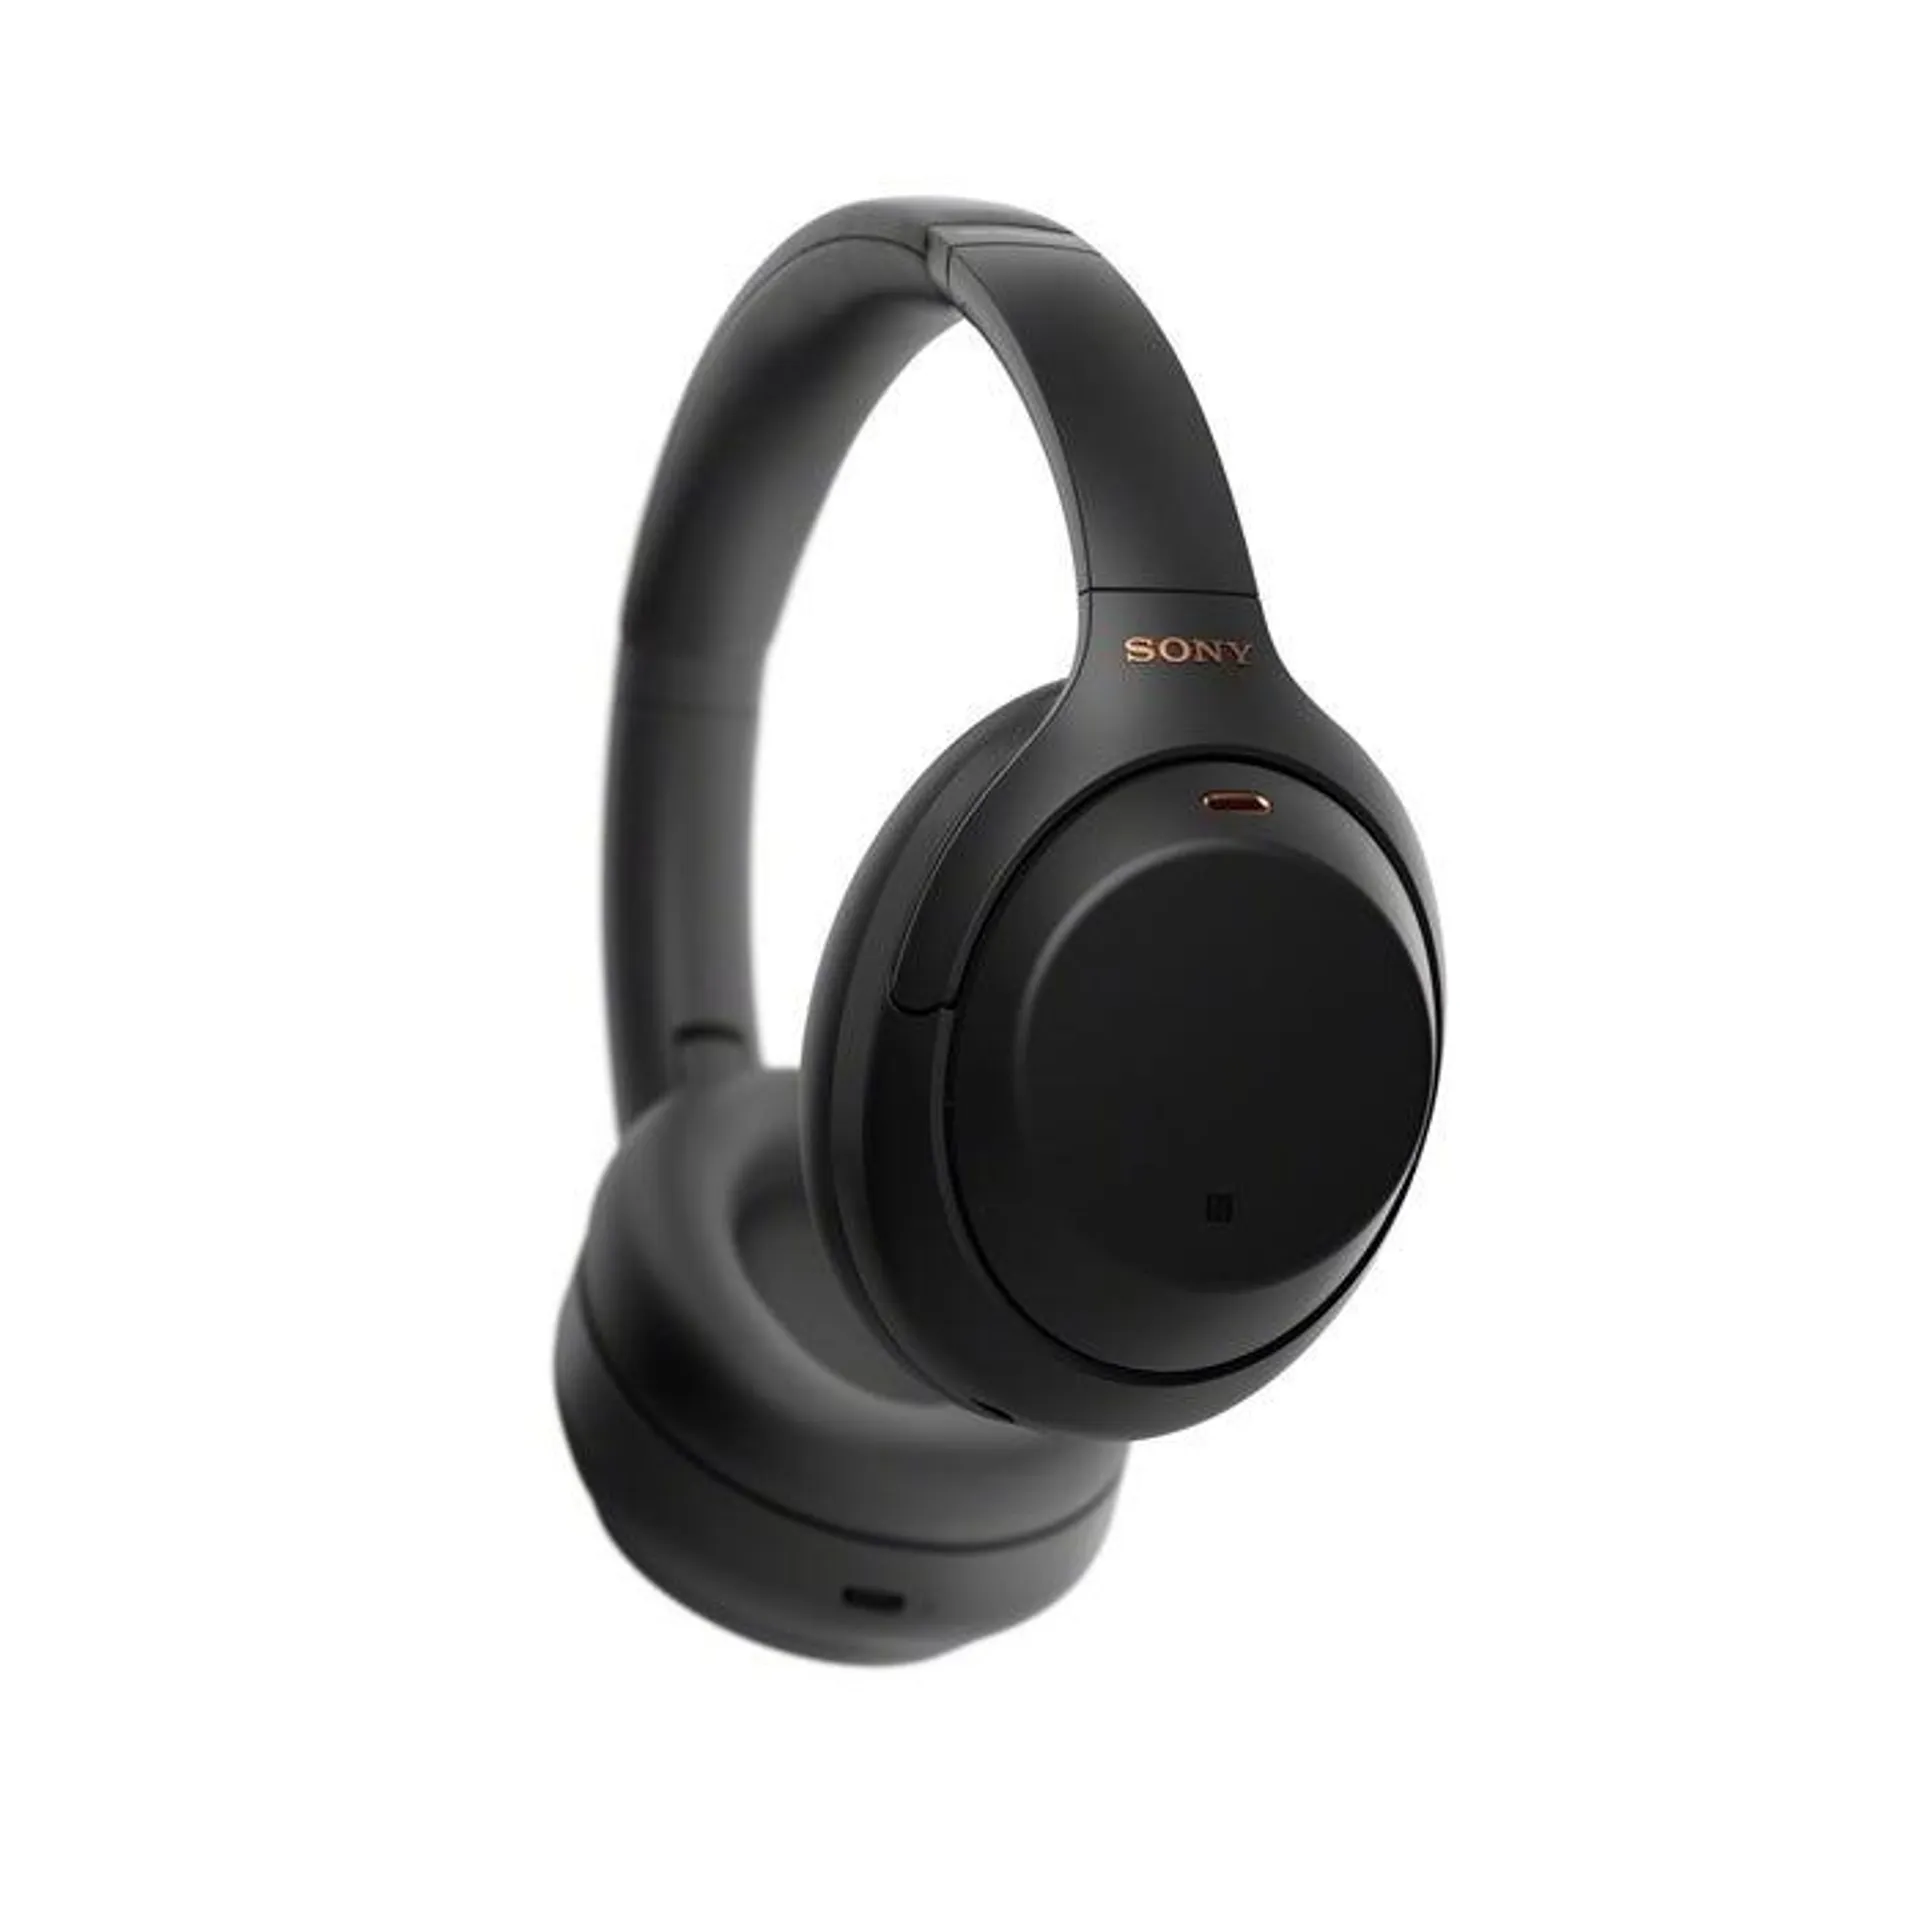 Sony Wireless Bluetooth Over-Ear M4 Noice Cancelling Headphone - Black